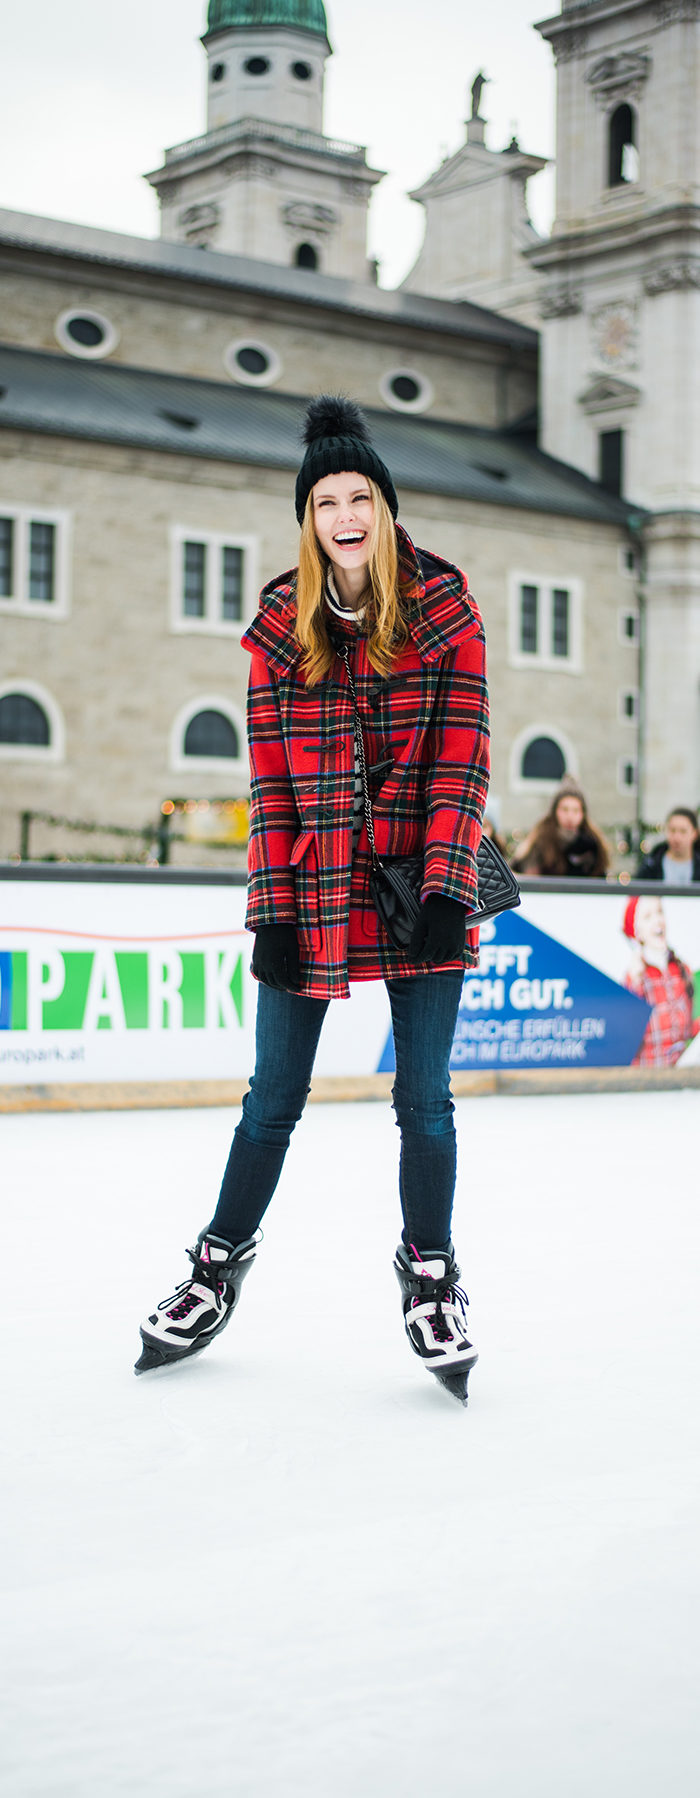 Alyssa Campanella of The A List blog sharing her favorite coats for fall and winter wearing Gloverall in Austria